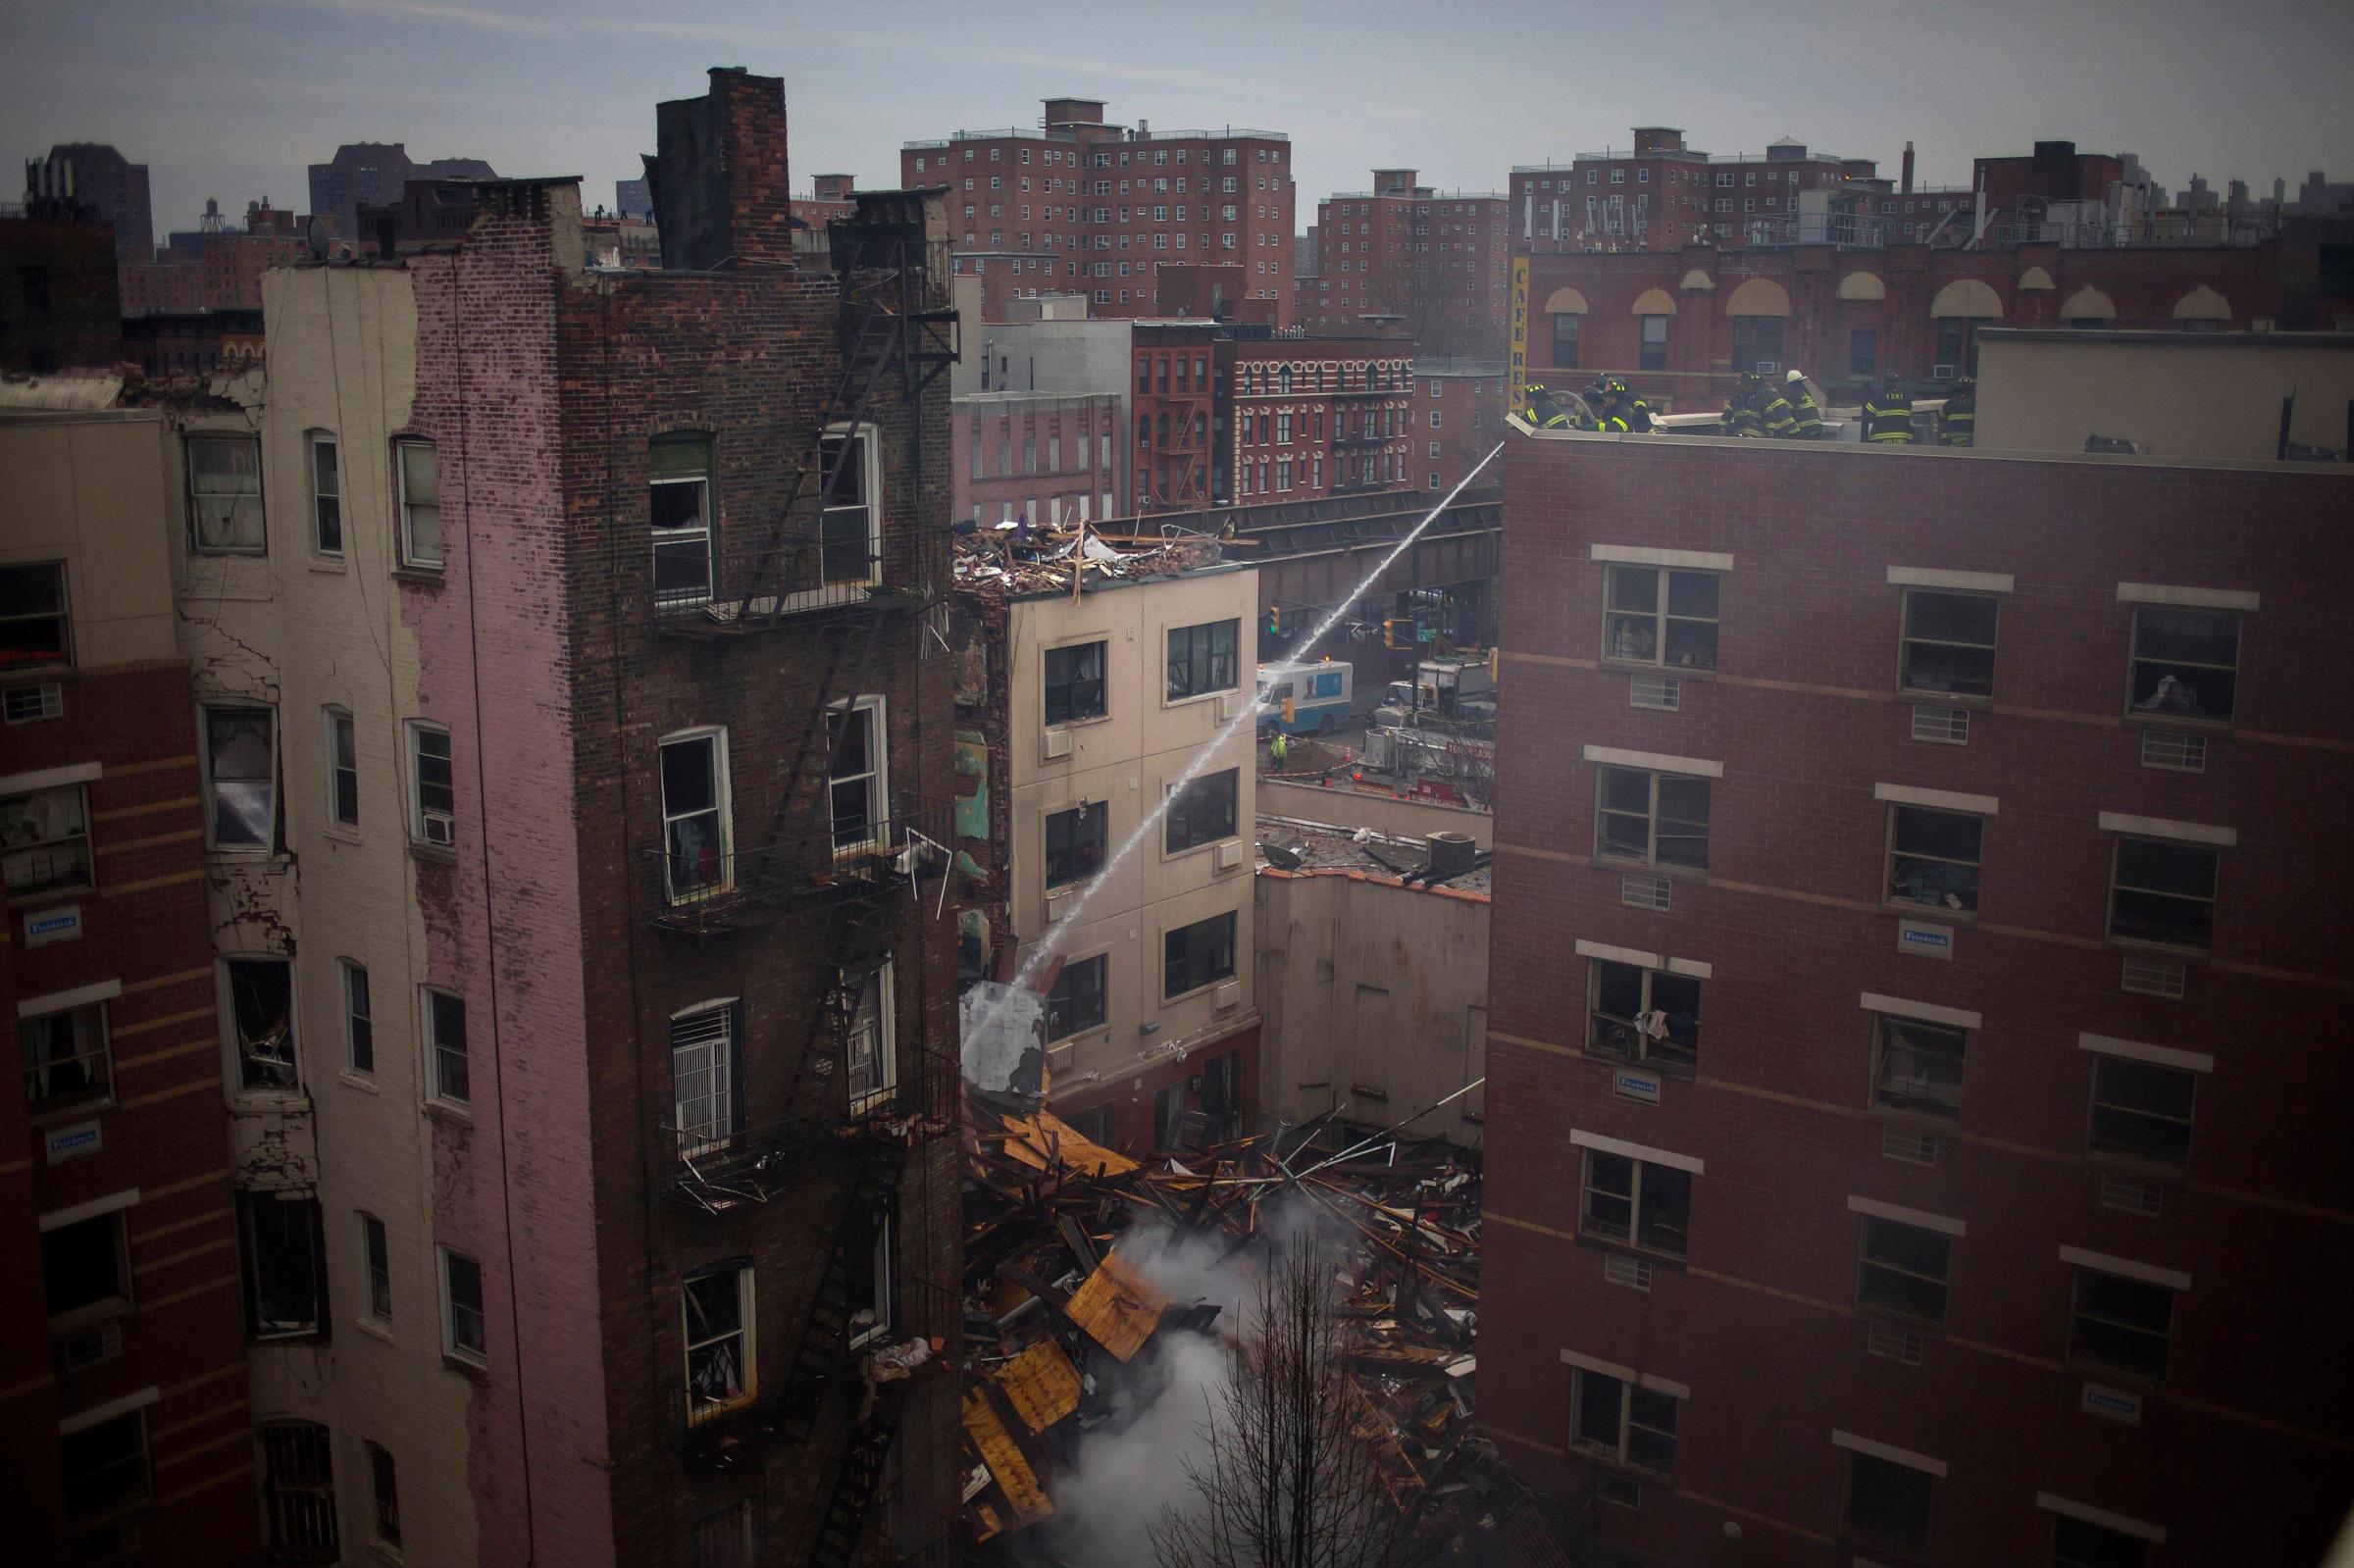 New York City firefighters examine the rubble at an apparent building explosion fire and collapse in the Harlem section of New York